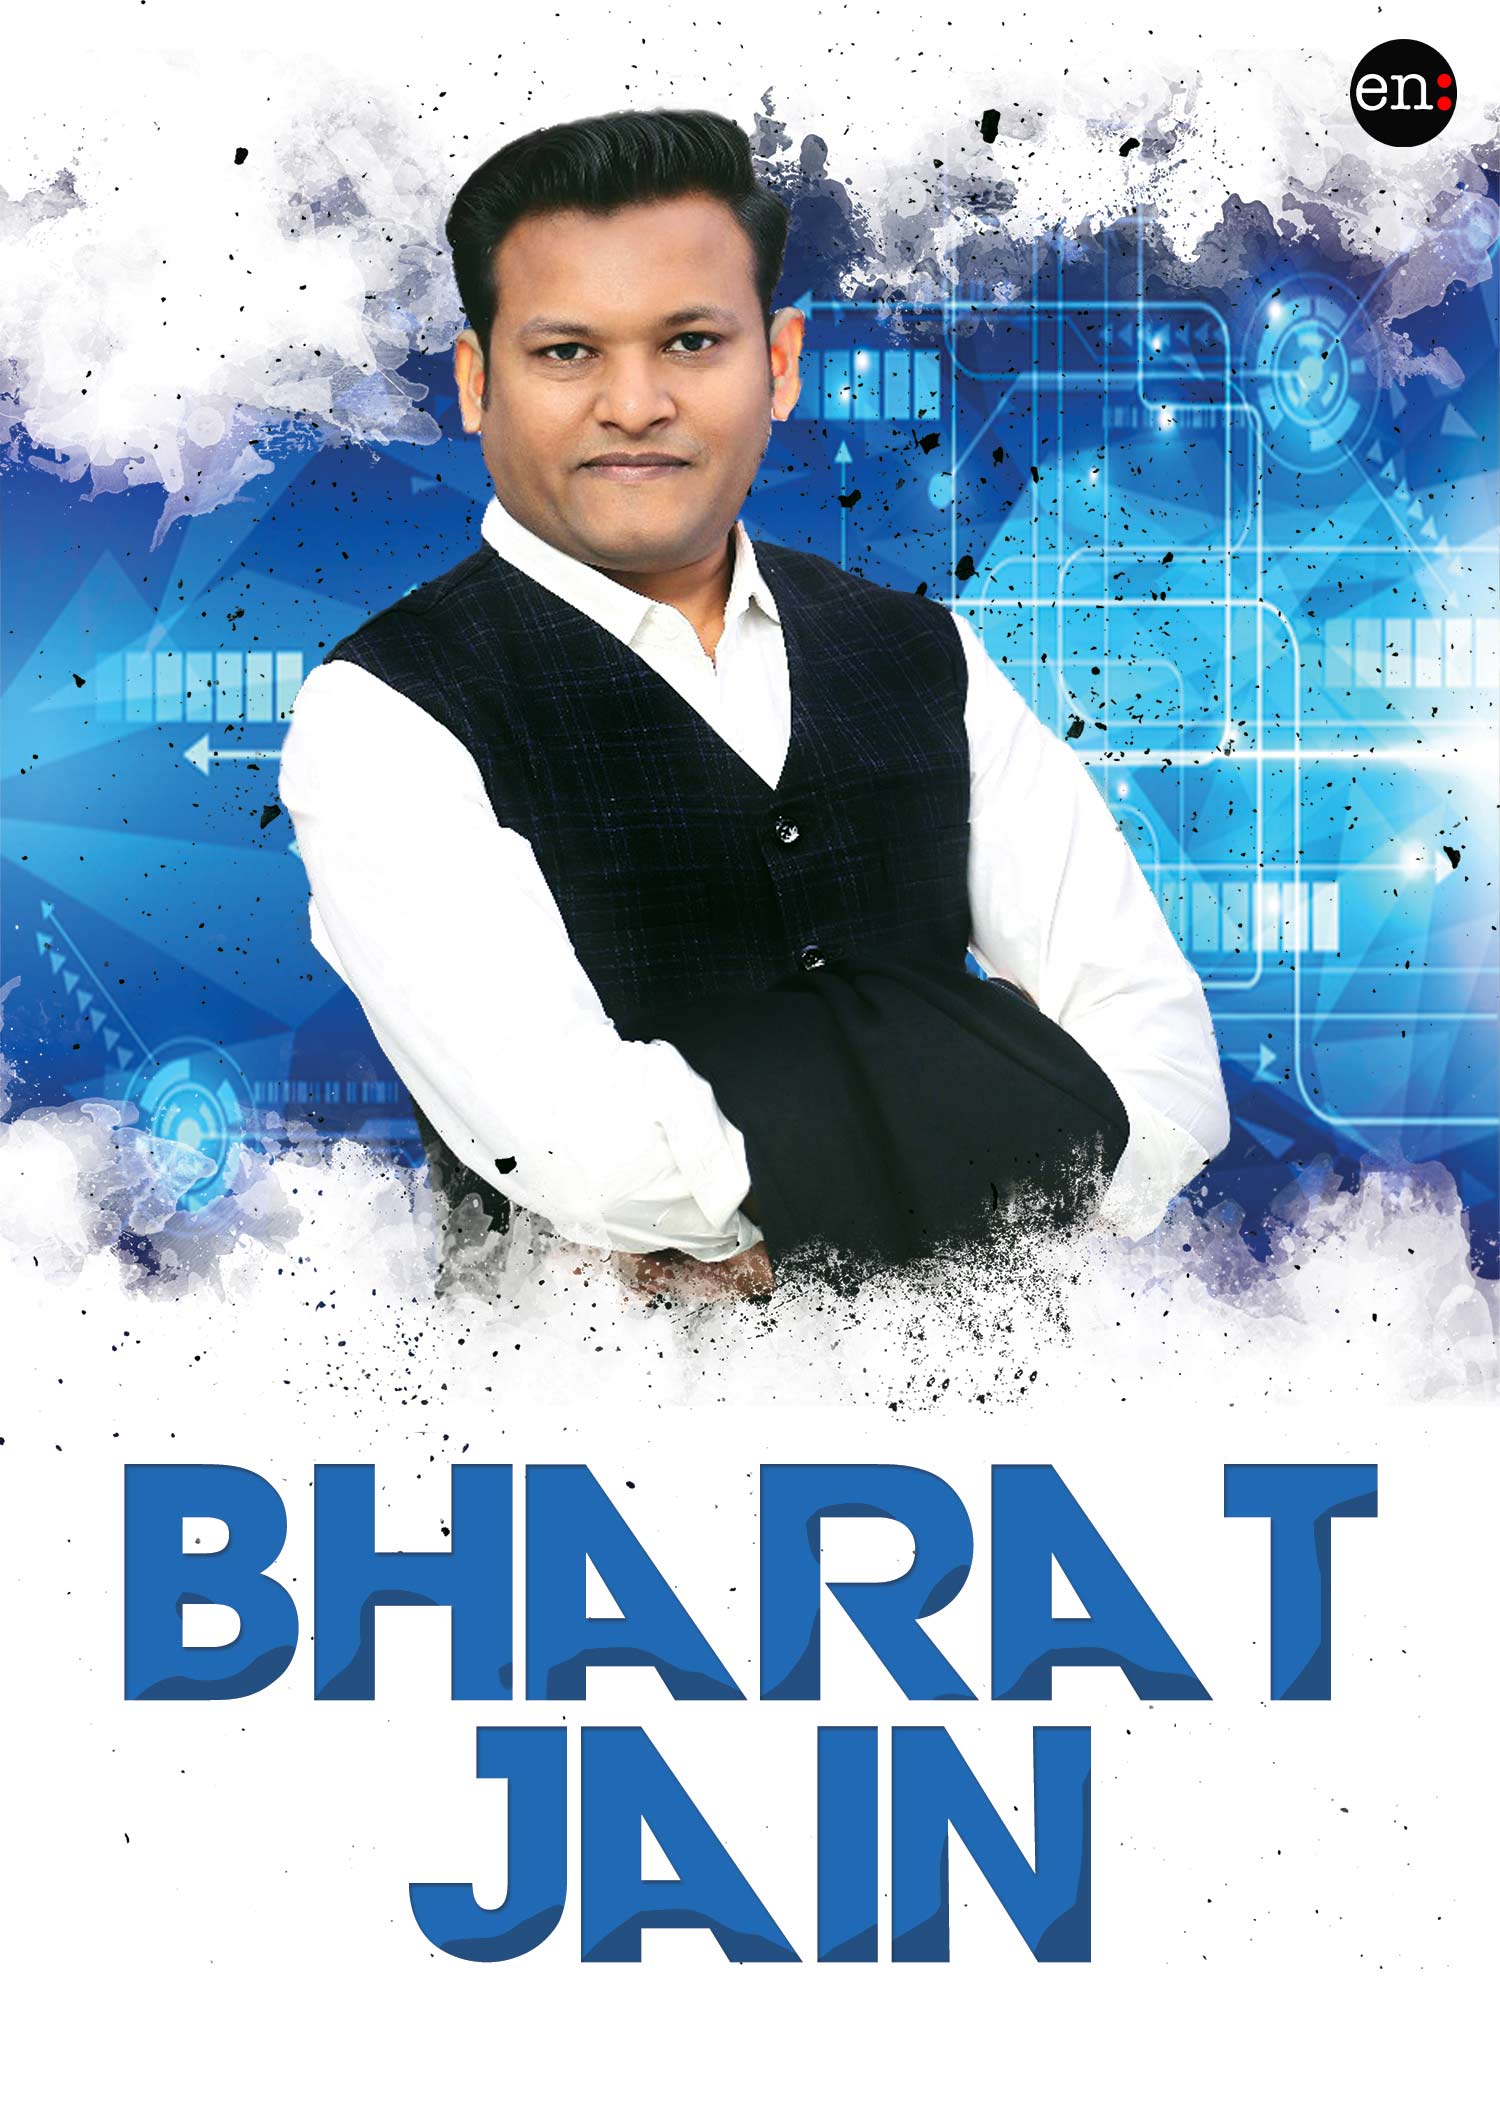 Bharat Jain - Contact Number, Phone Number, Mobile Number, Whatsapp Number, Email Address and Website